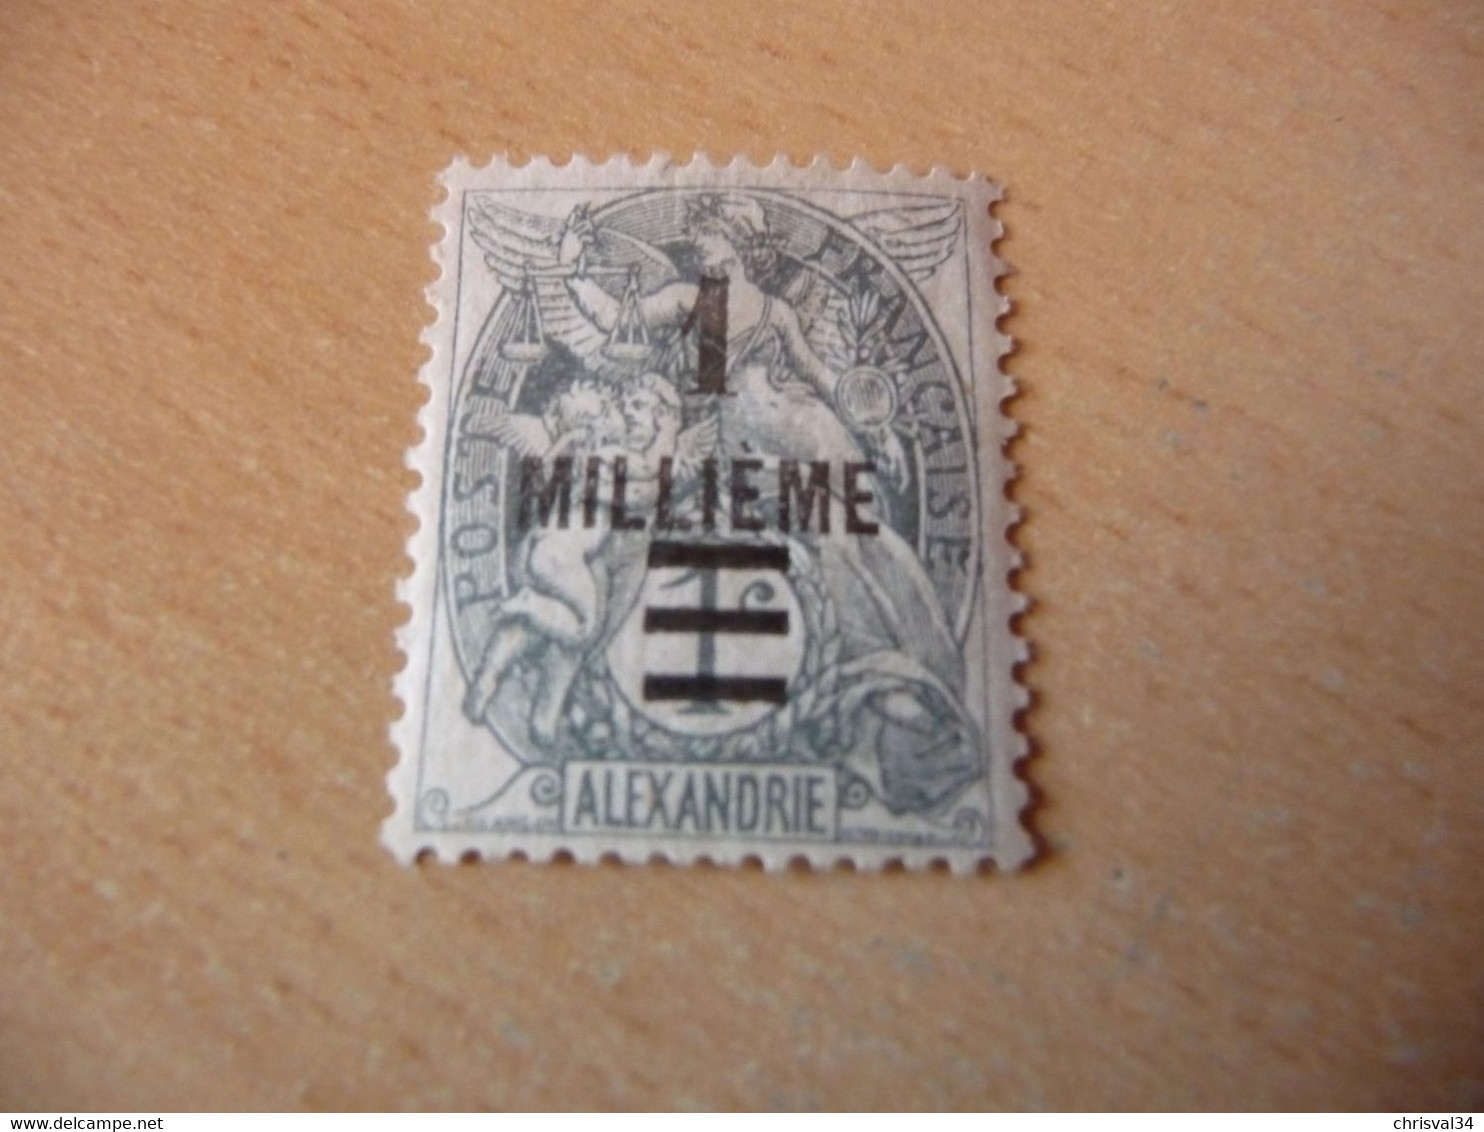 TIMBRE   ALEXANDRIE    N  64  COTE  2,00  EUROS    NEUF  TRACE  CHARNIERE - Nuevos